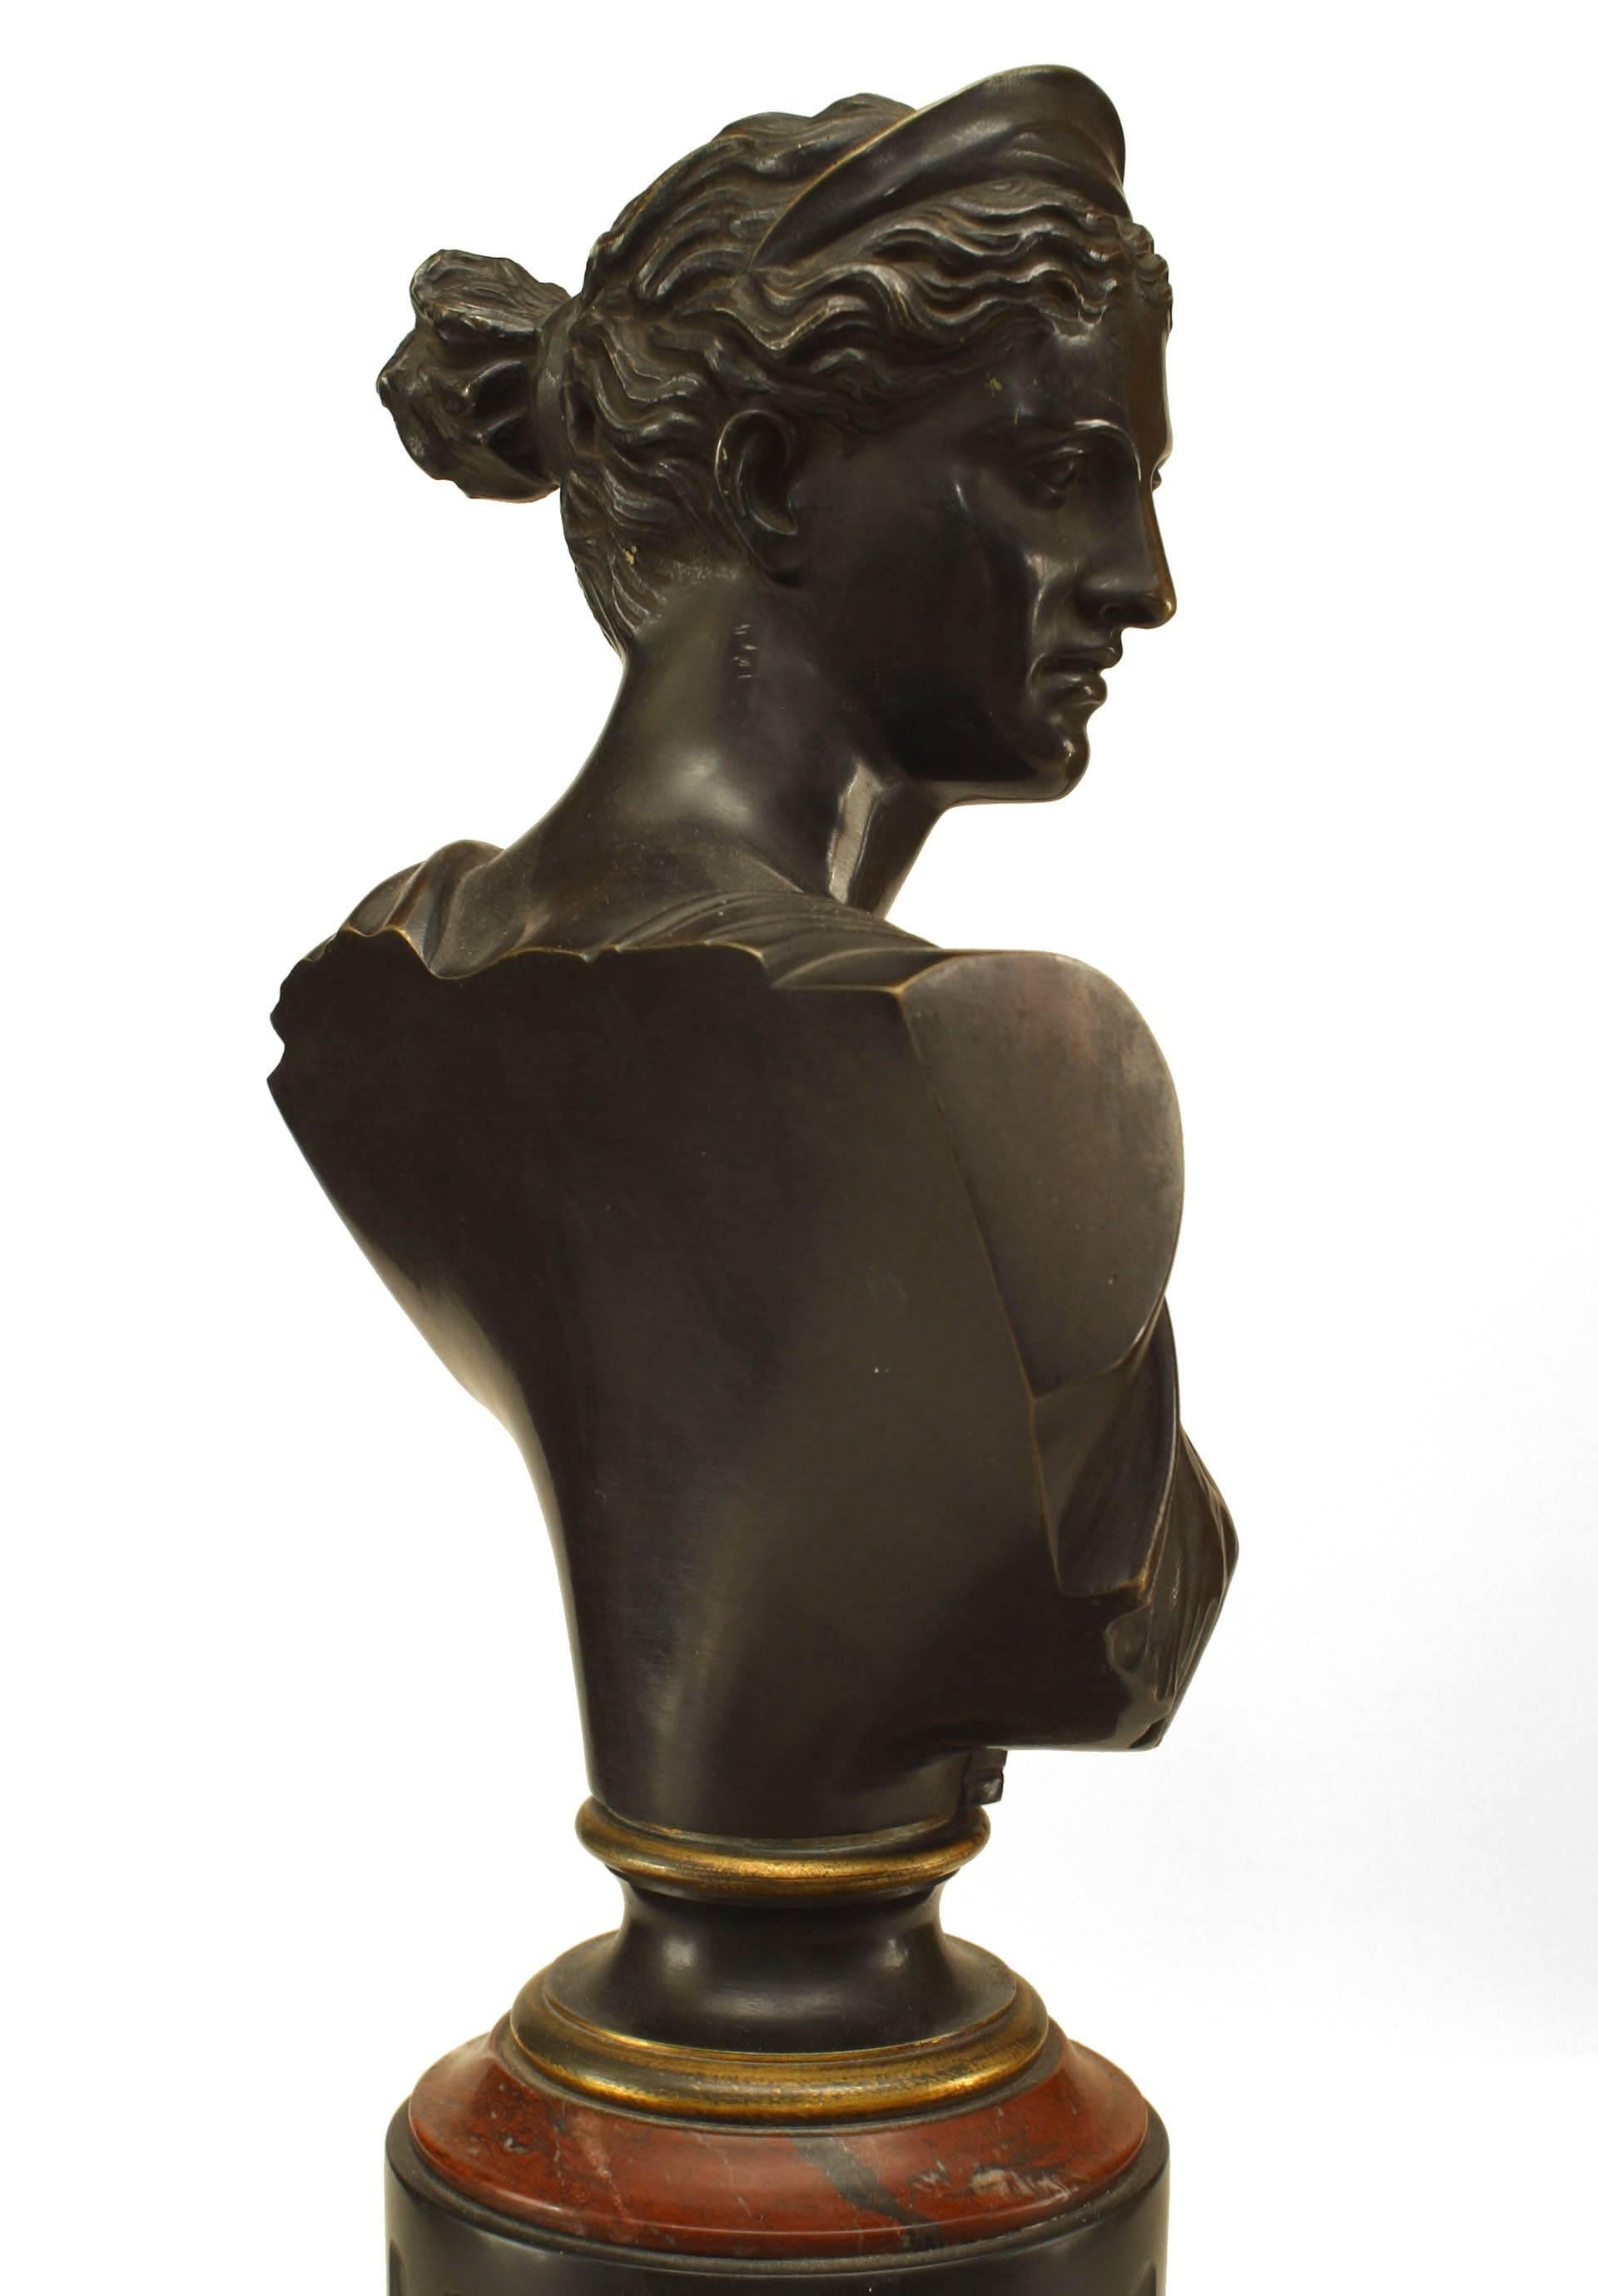 Pair of French Victorian bronze busts of Apollo and Diana mounted on a black marble square shaped base under a fluted column with red marble trim
